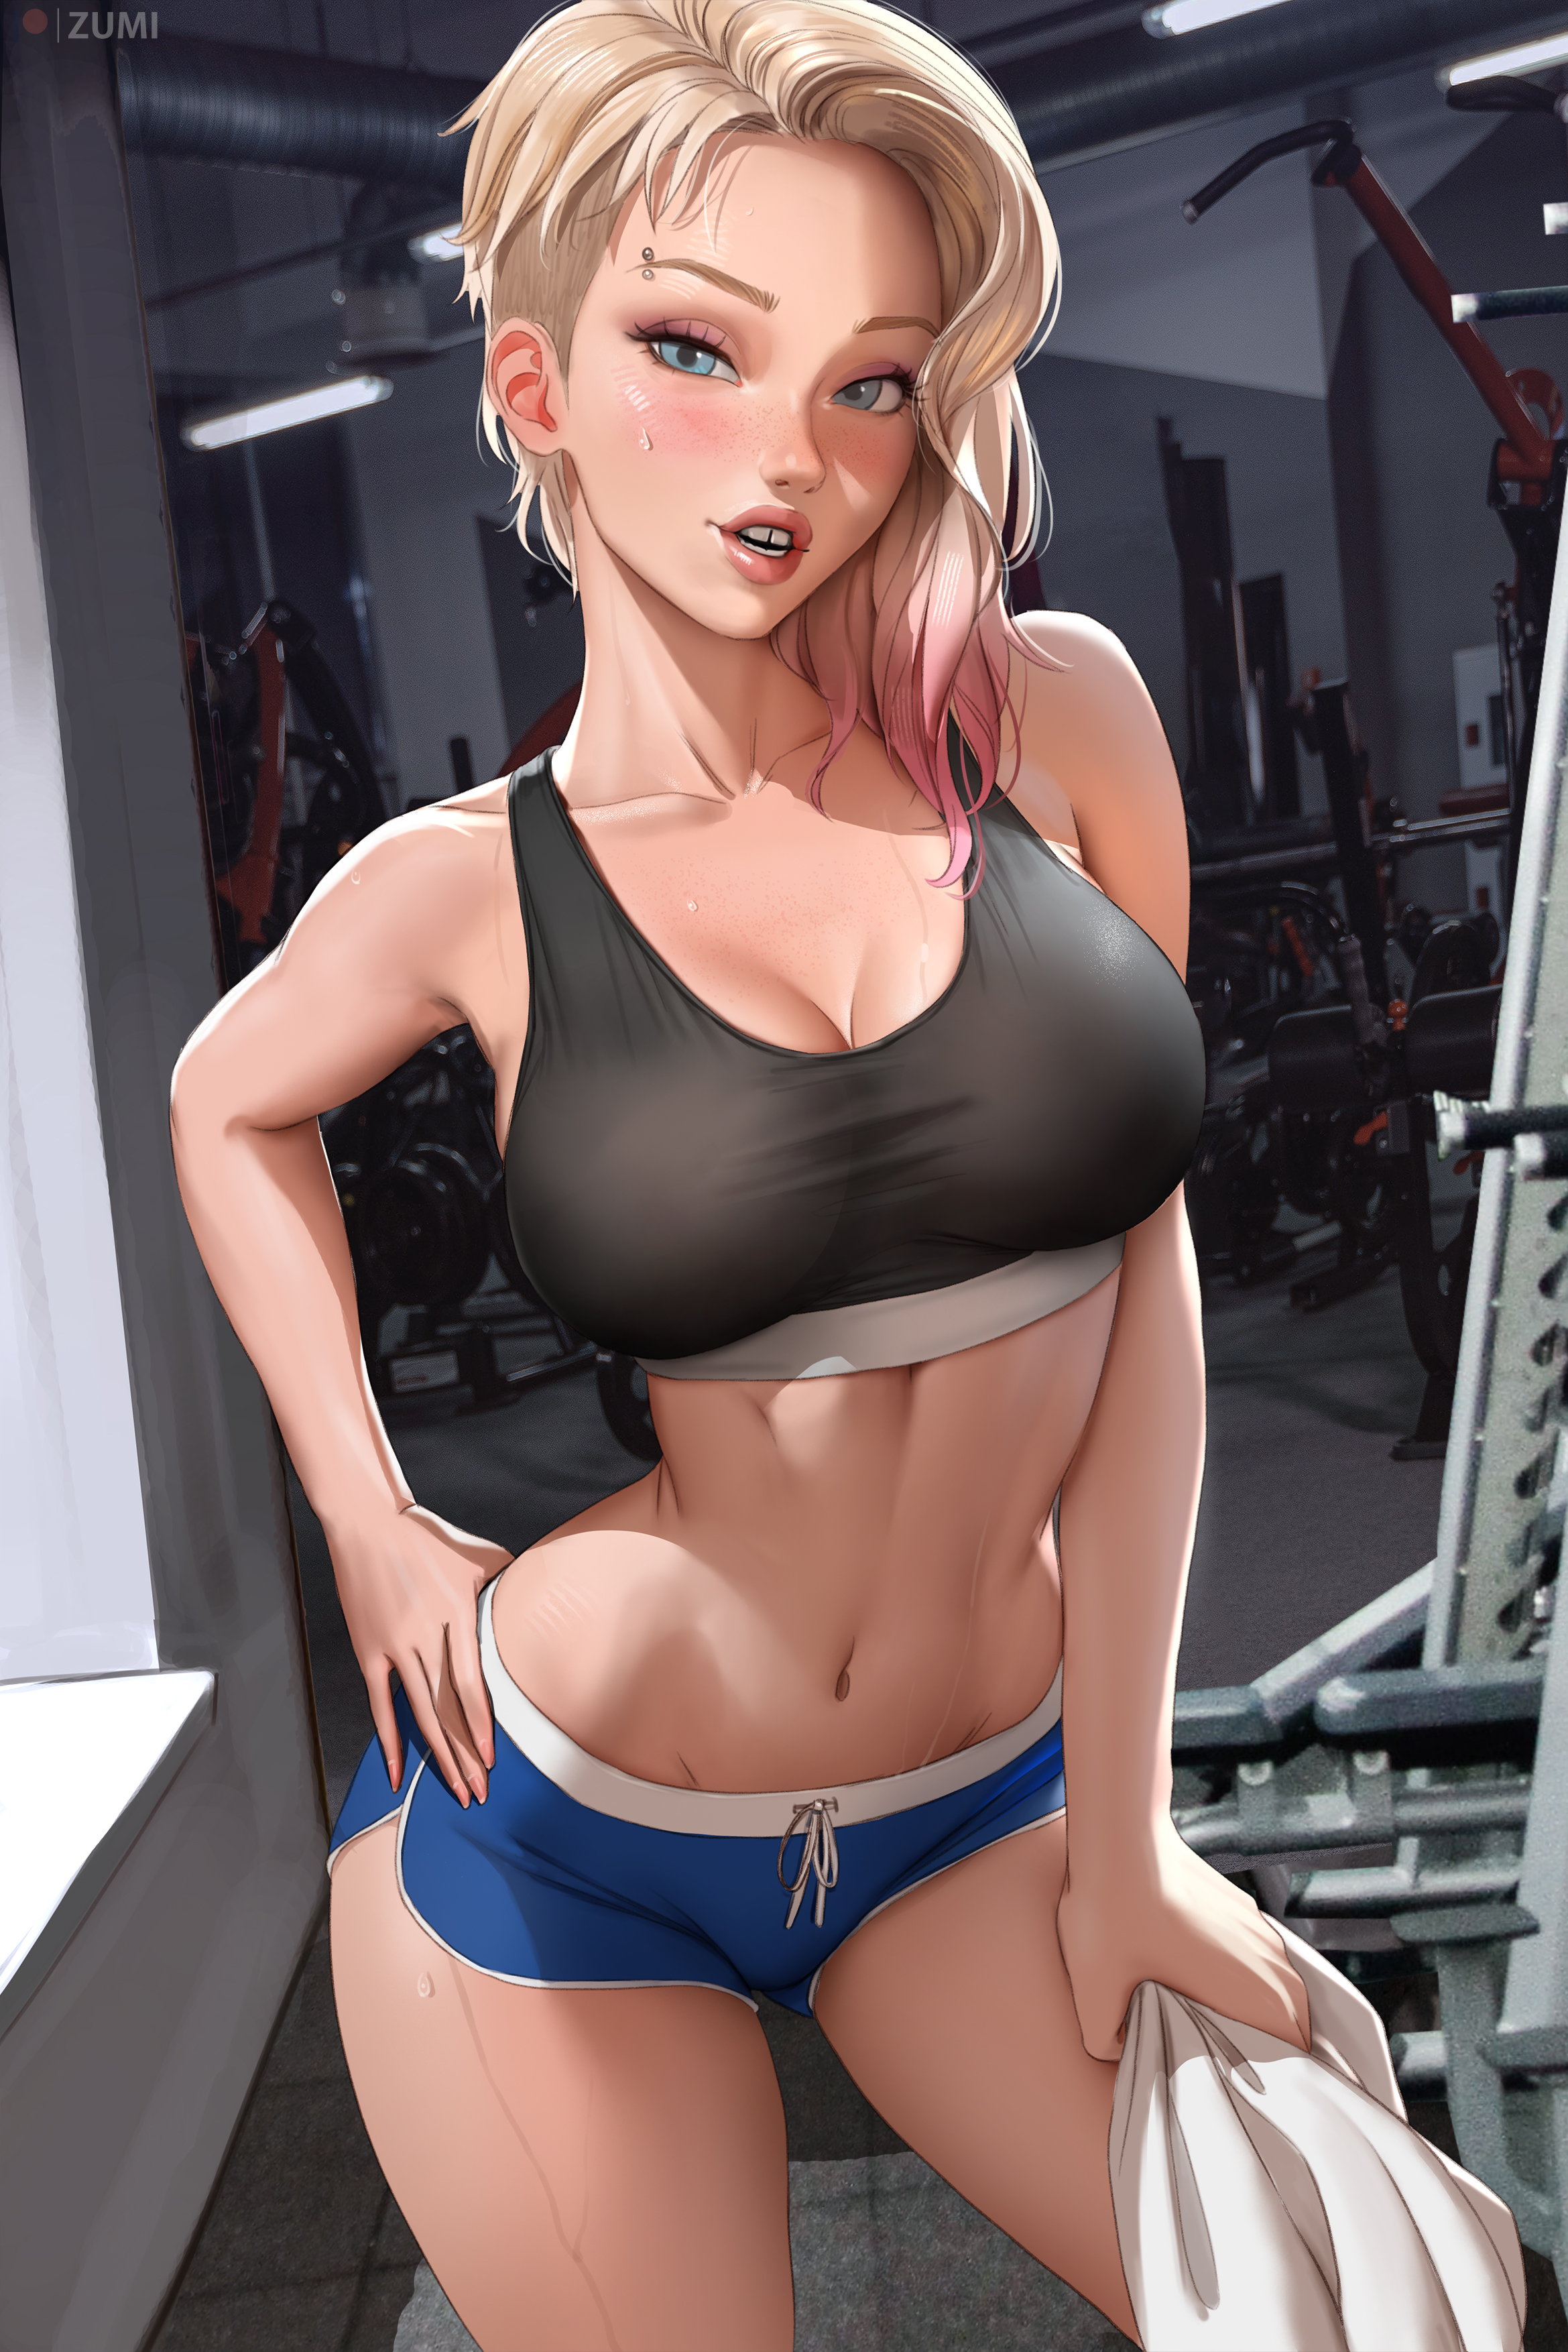 General 2339x3508 Gwen Stacy marvel character gyms sportswear artwork drawing fan art digital art Zumi portrait display standing collarbone short hair gradient hair two tone hair cleavage big boobs gym clothes parted lips gym equipment skinny dolphin shorts tank top hands on hips towel sweaty body freckles piercing looking at viewer women